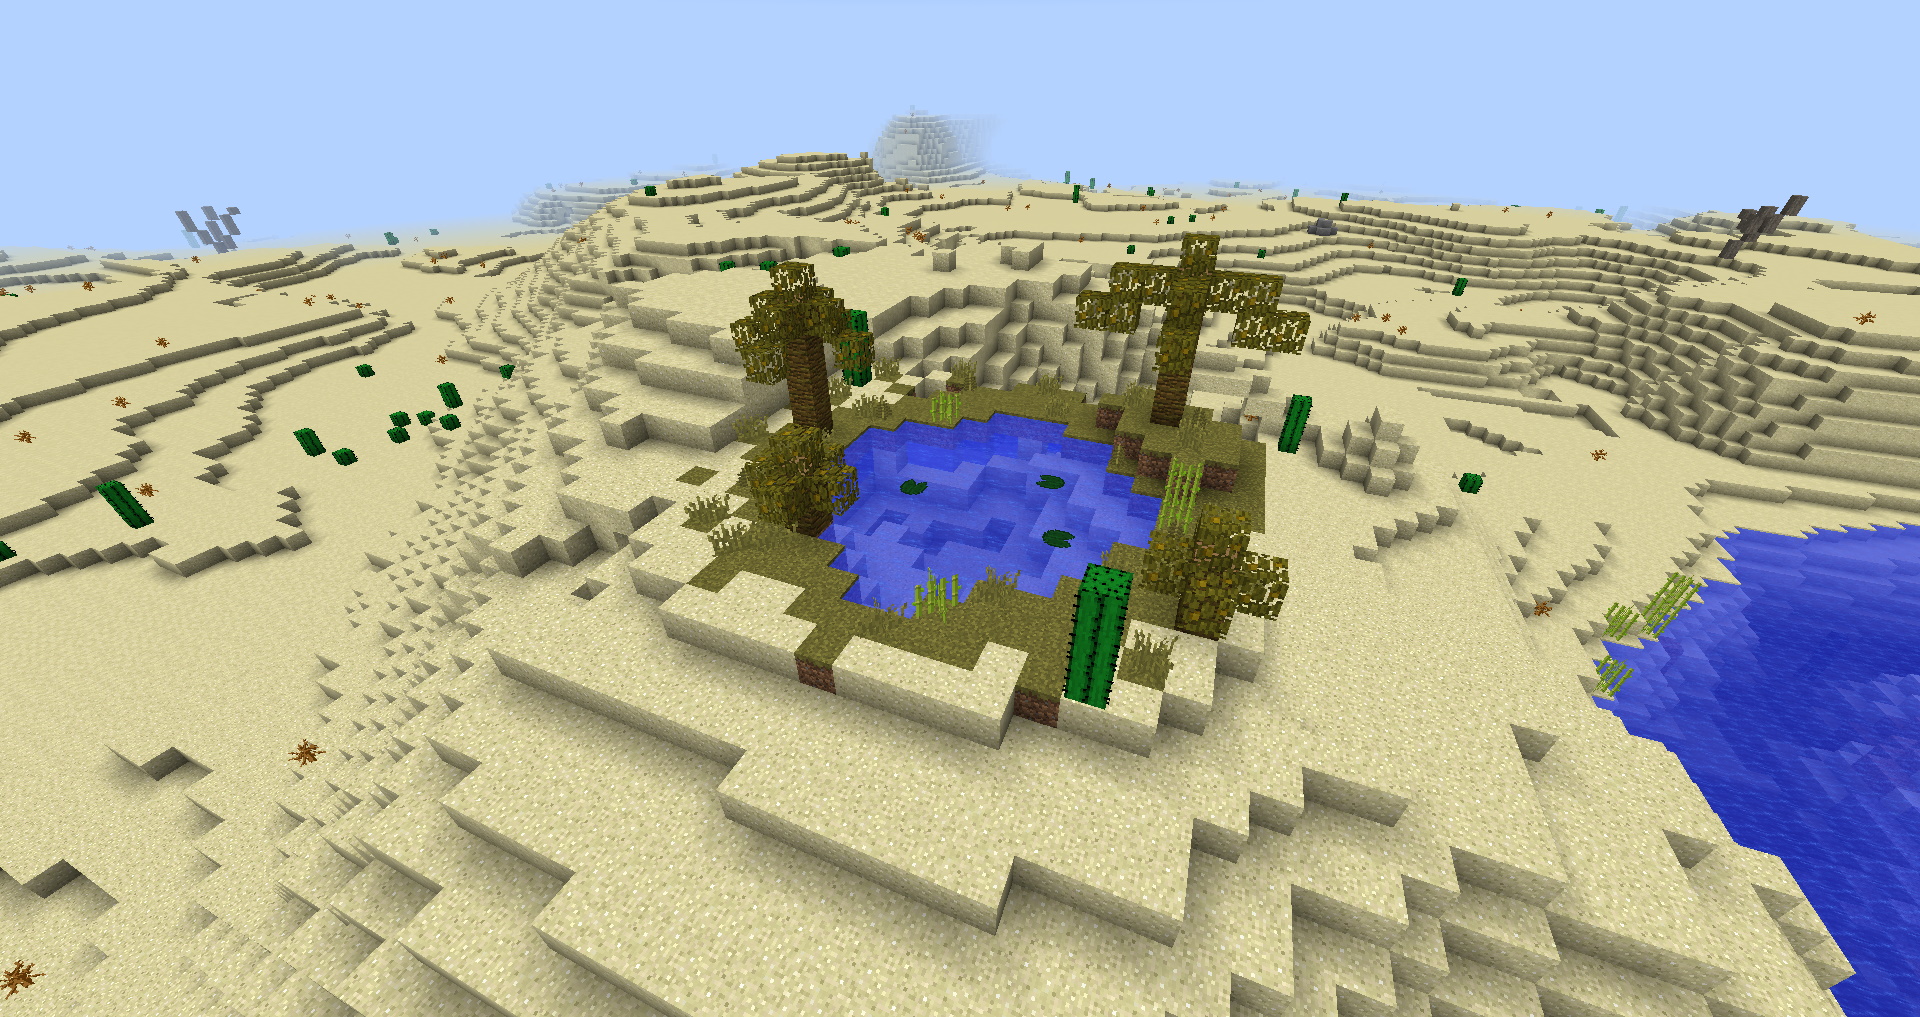 Minecraft Mods - Additional Structures - An oasis in the desert with palm trees